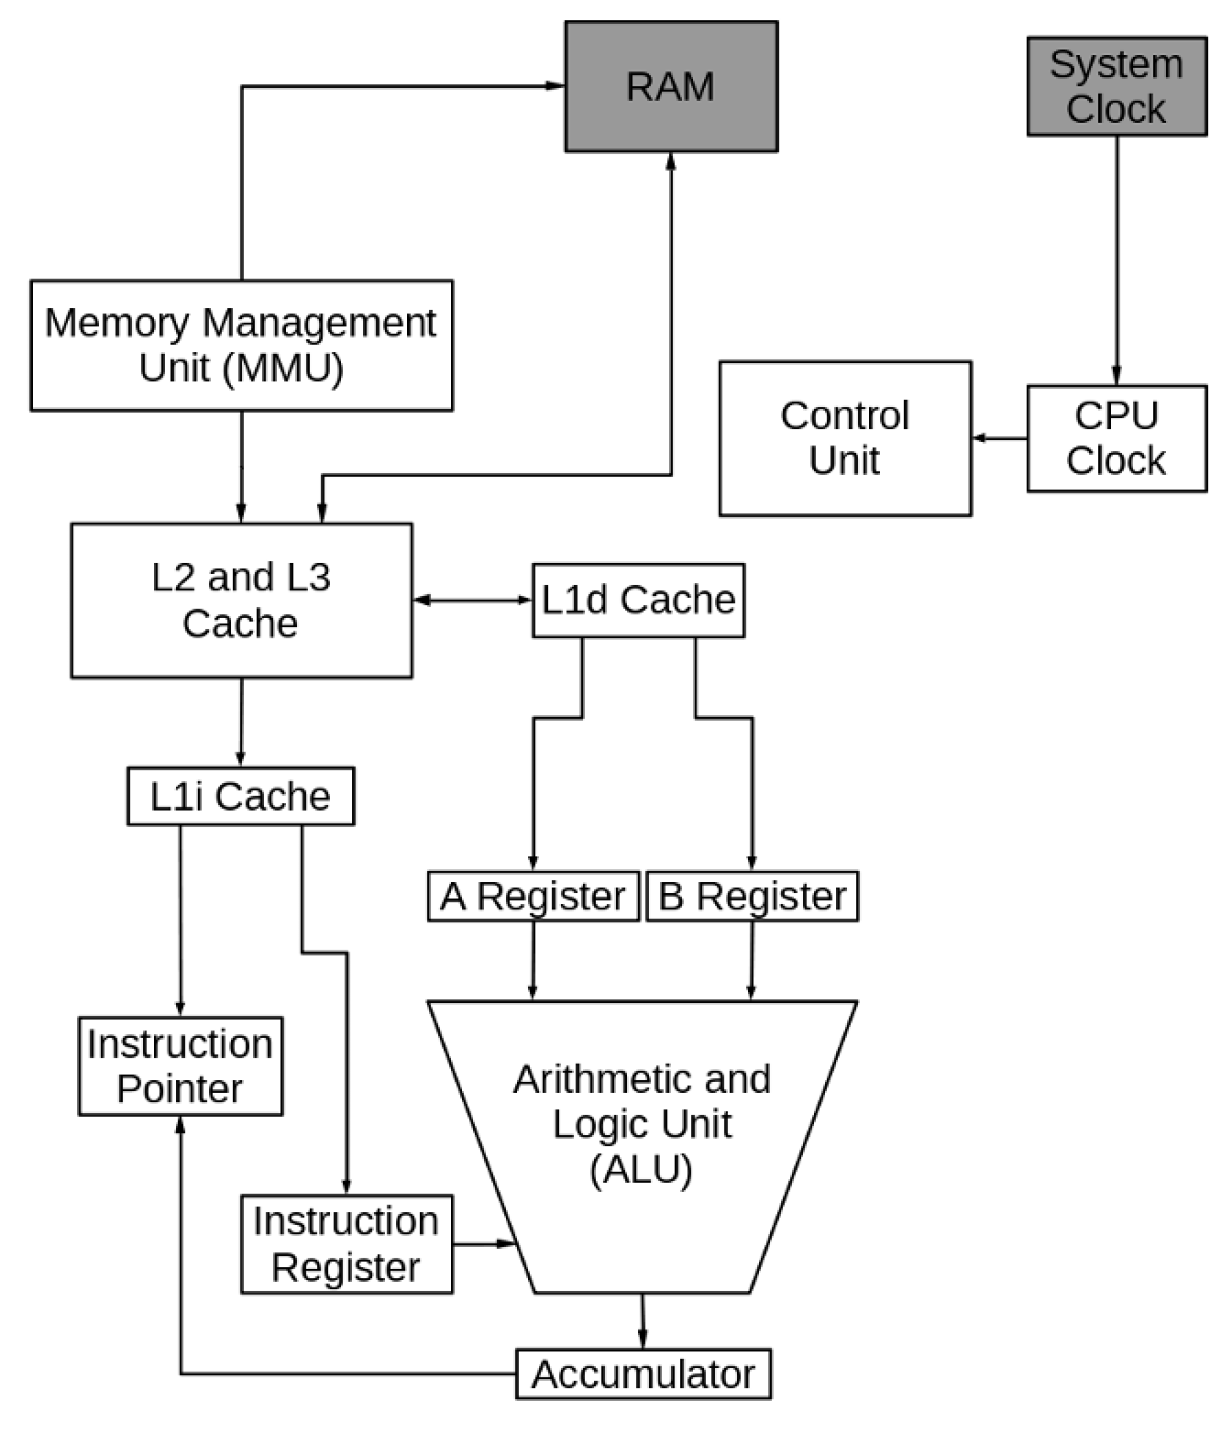 The central processing unit (CPU) Its components and functionality